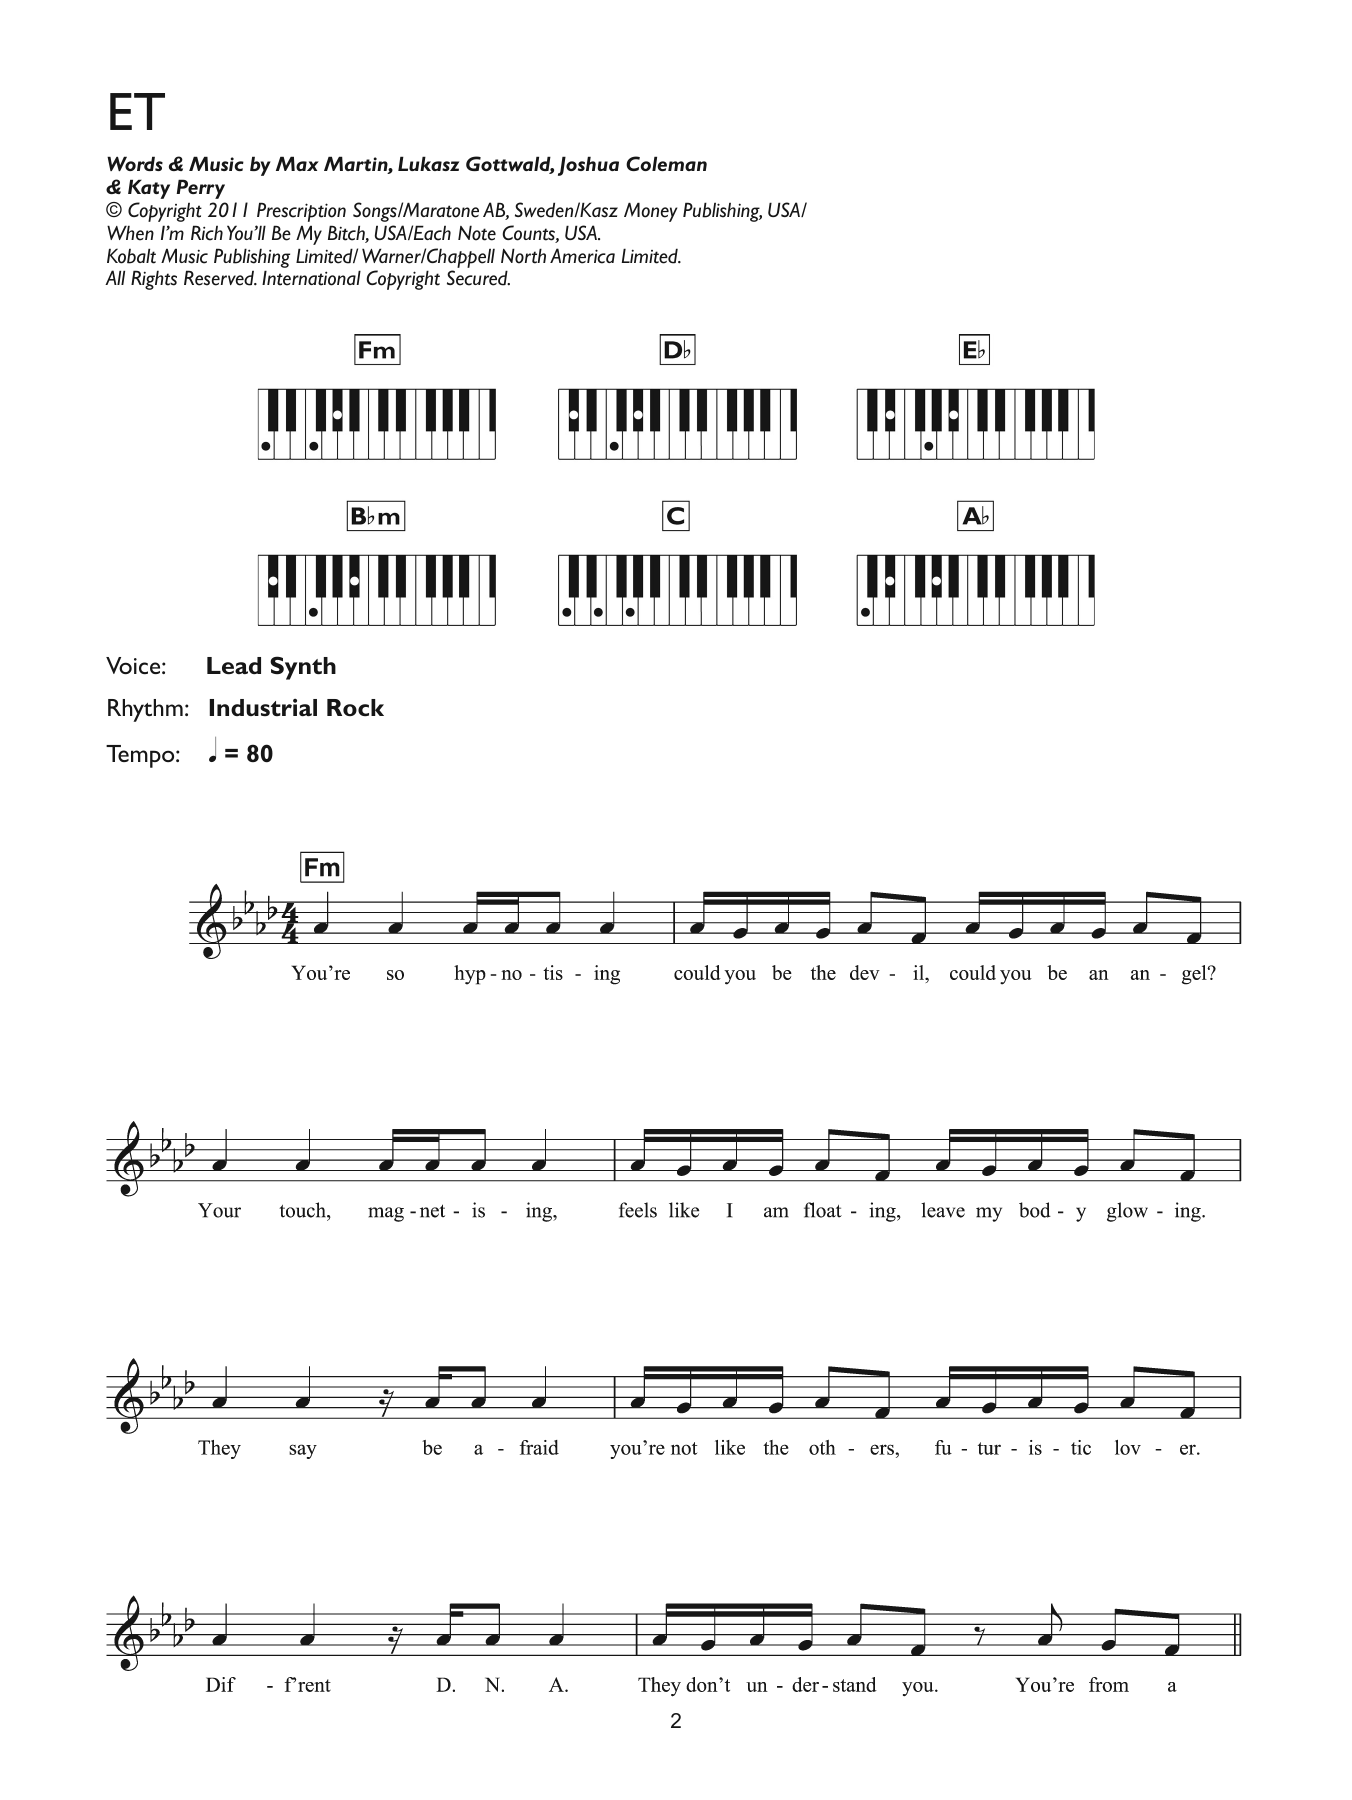 Download Katy Perry E.T. (featuring Kanye West) Sheet Music